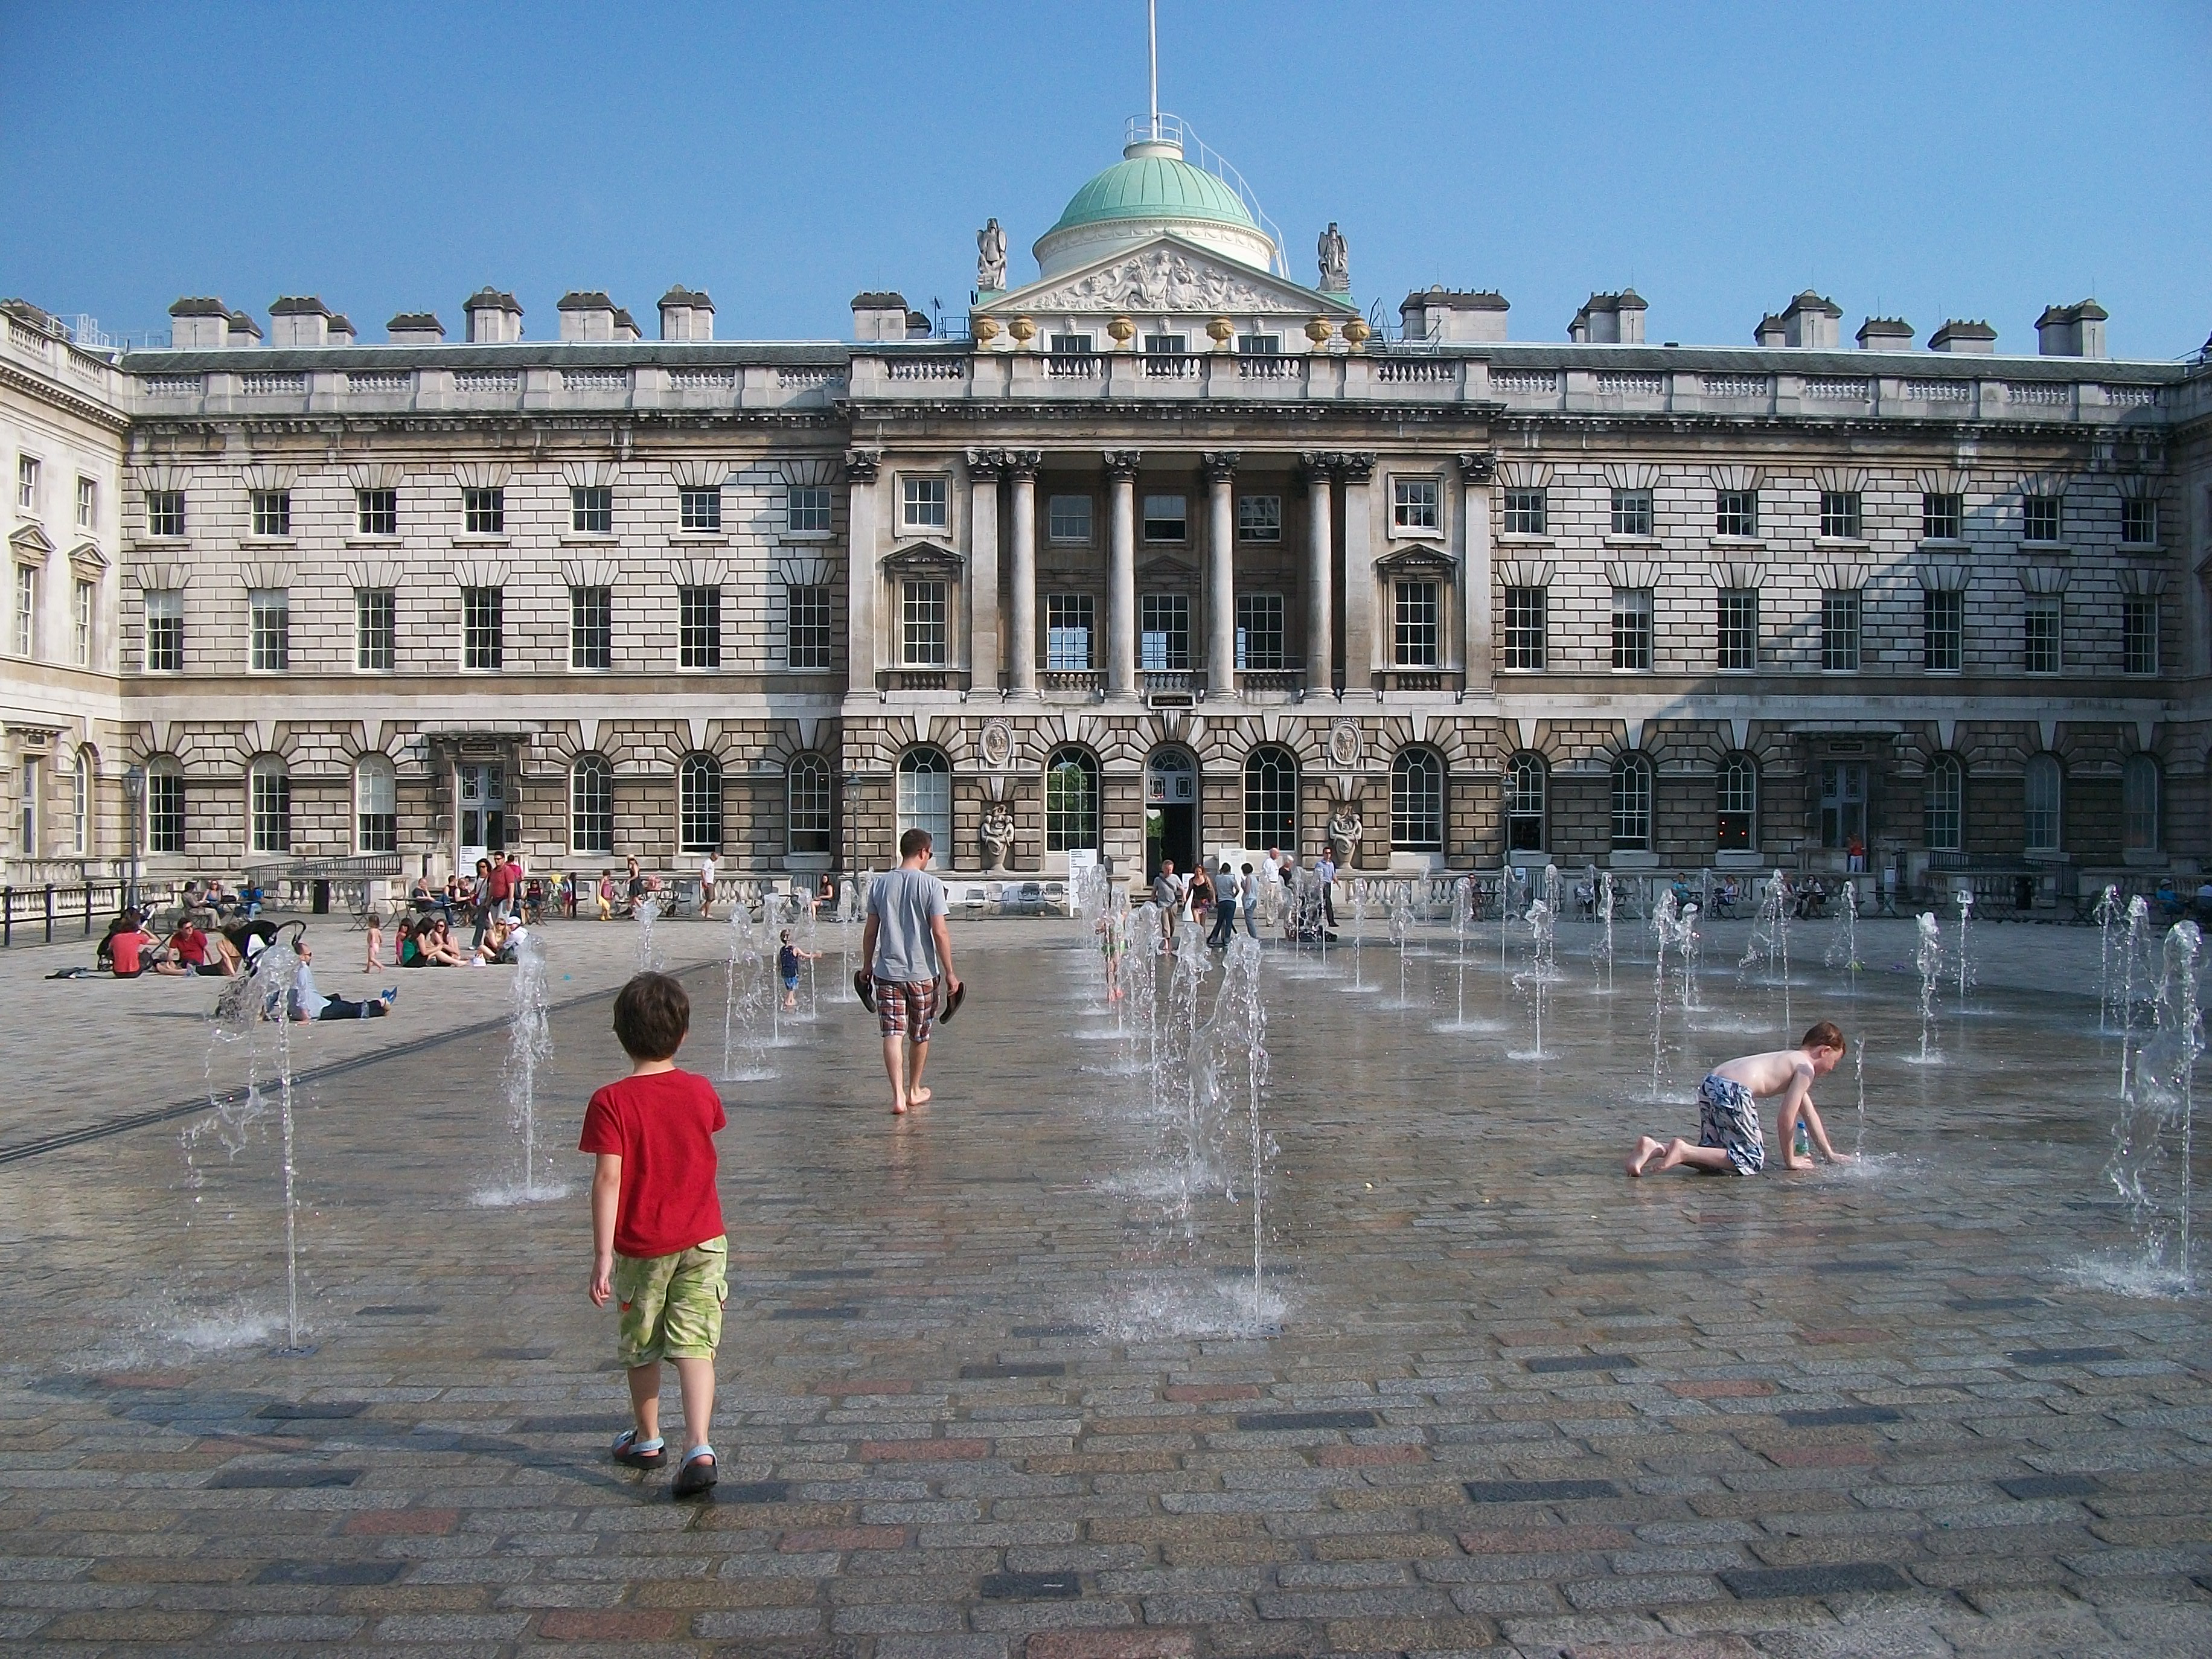 Download this Somerset House Major Arts And Cultural Centre The Heart London picture